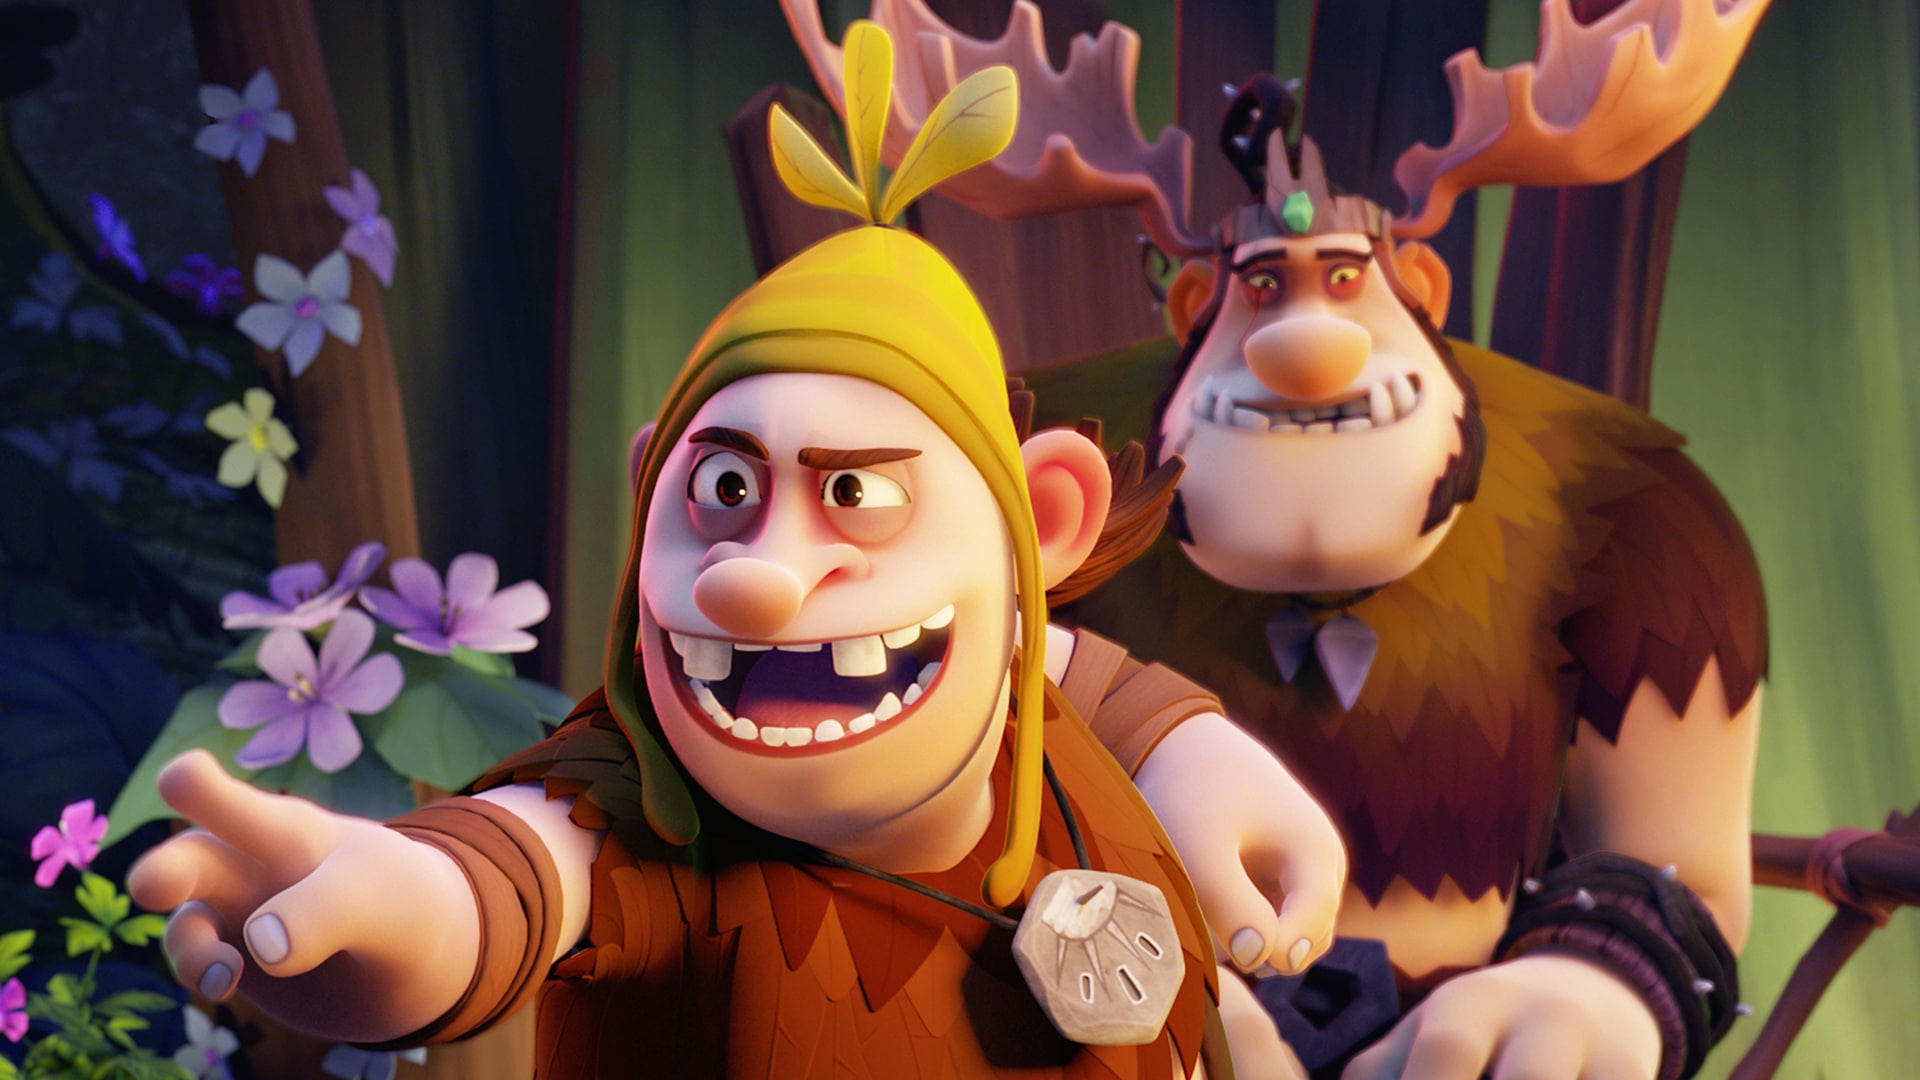 A troll pointing and a troll with antlers on his head from the movie Troll kongens hale.